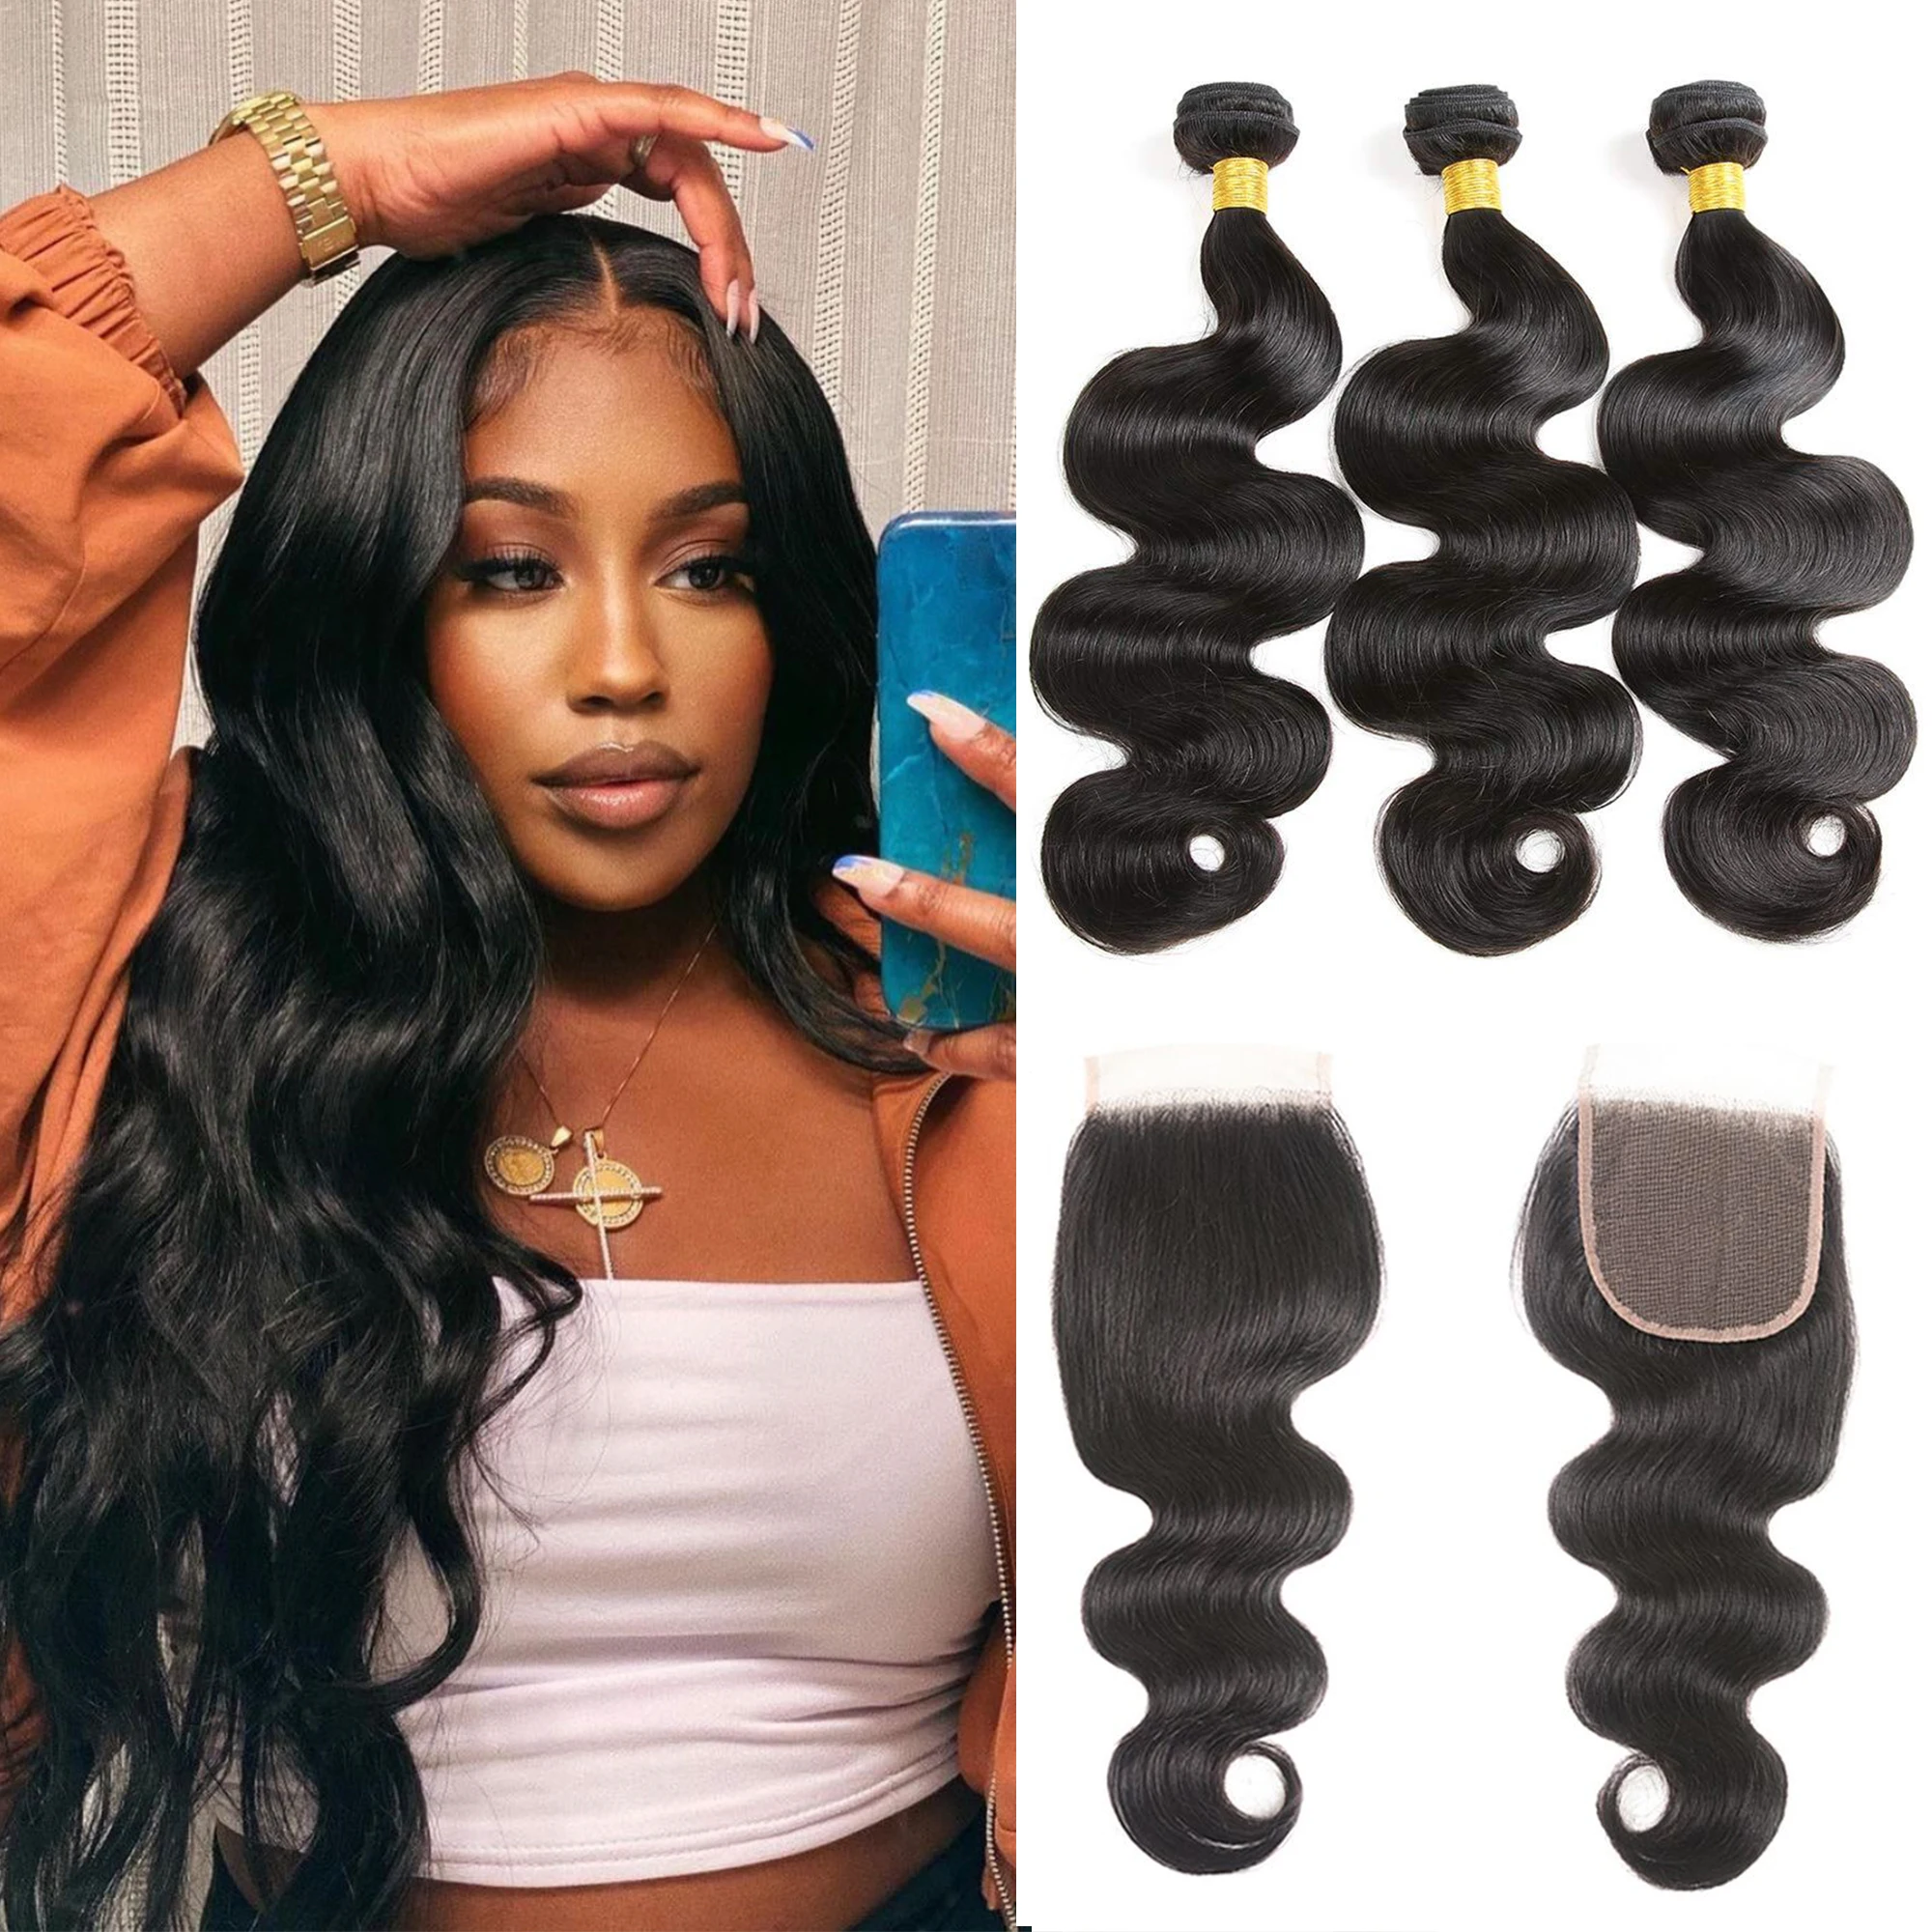 ZZY Fashion Brazilian Hair Weave Body Wave 3 Bundles With 1 Closure Human Hair Bundles With Lace Closure Non-Remy Human Hair